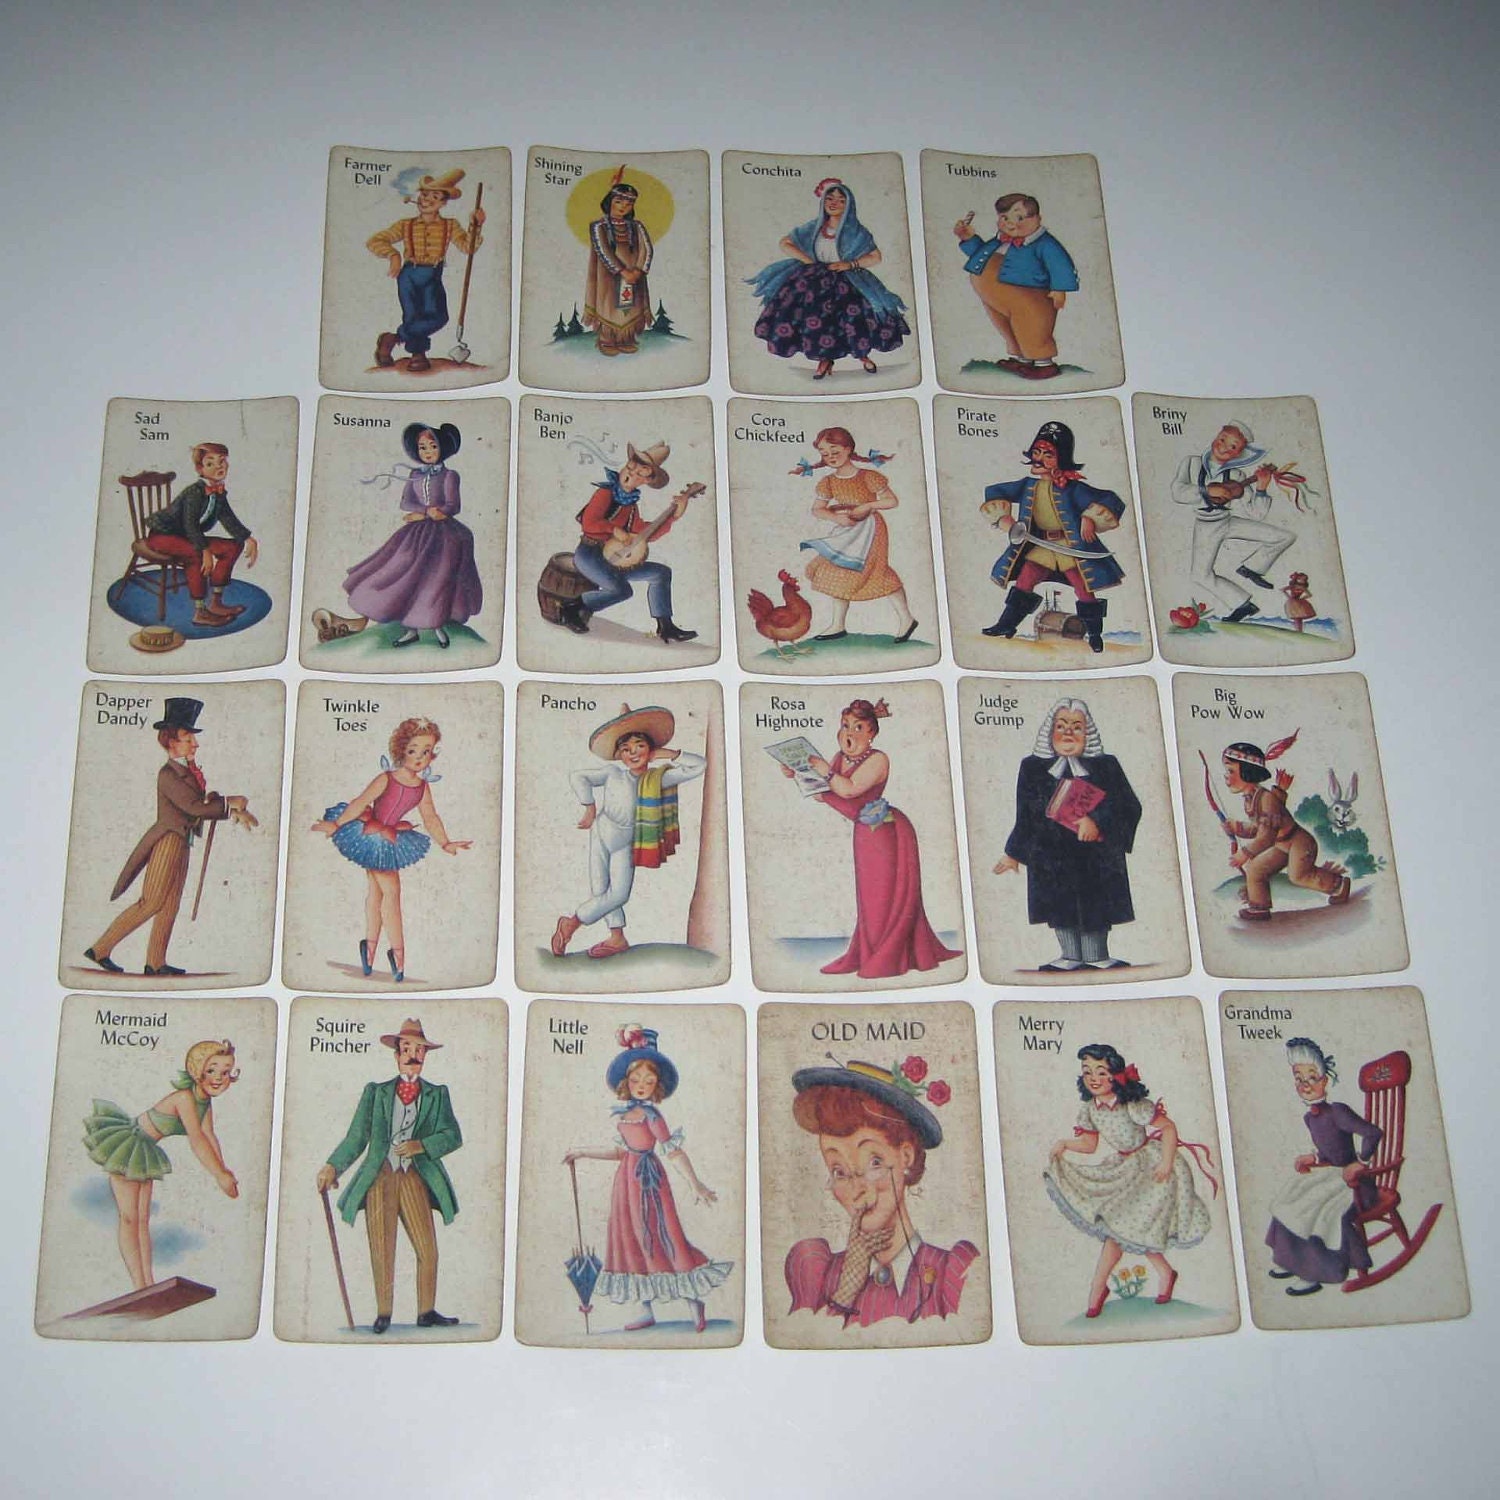 antique old maid cards